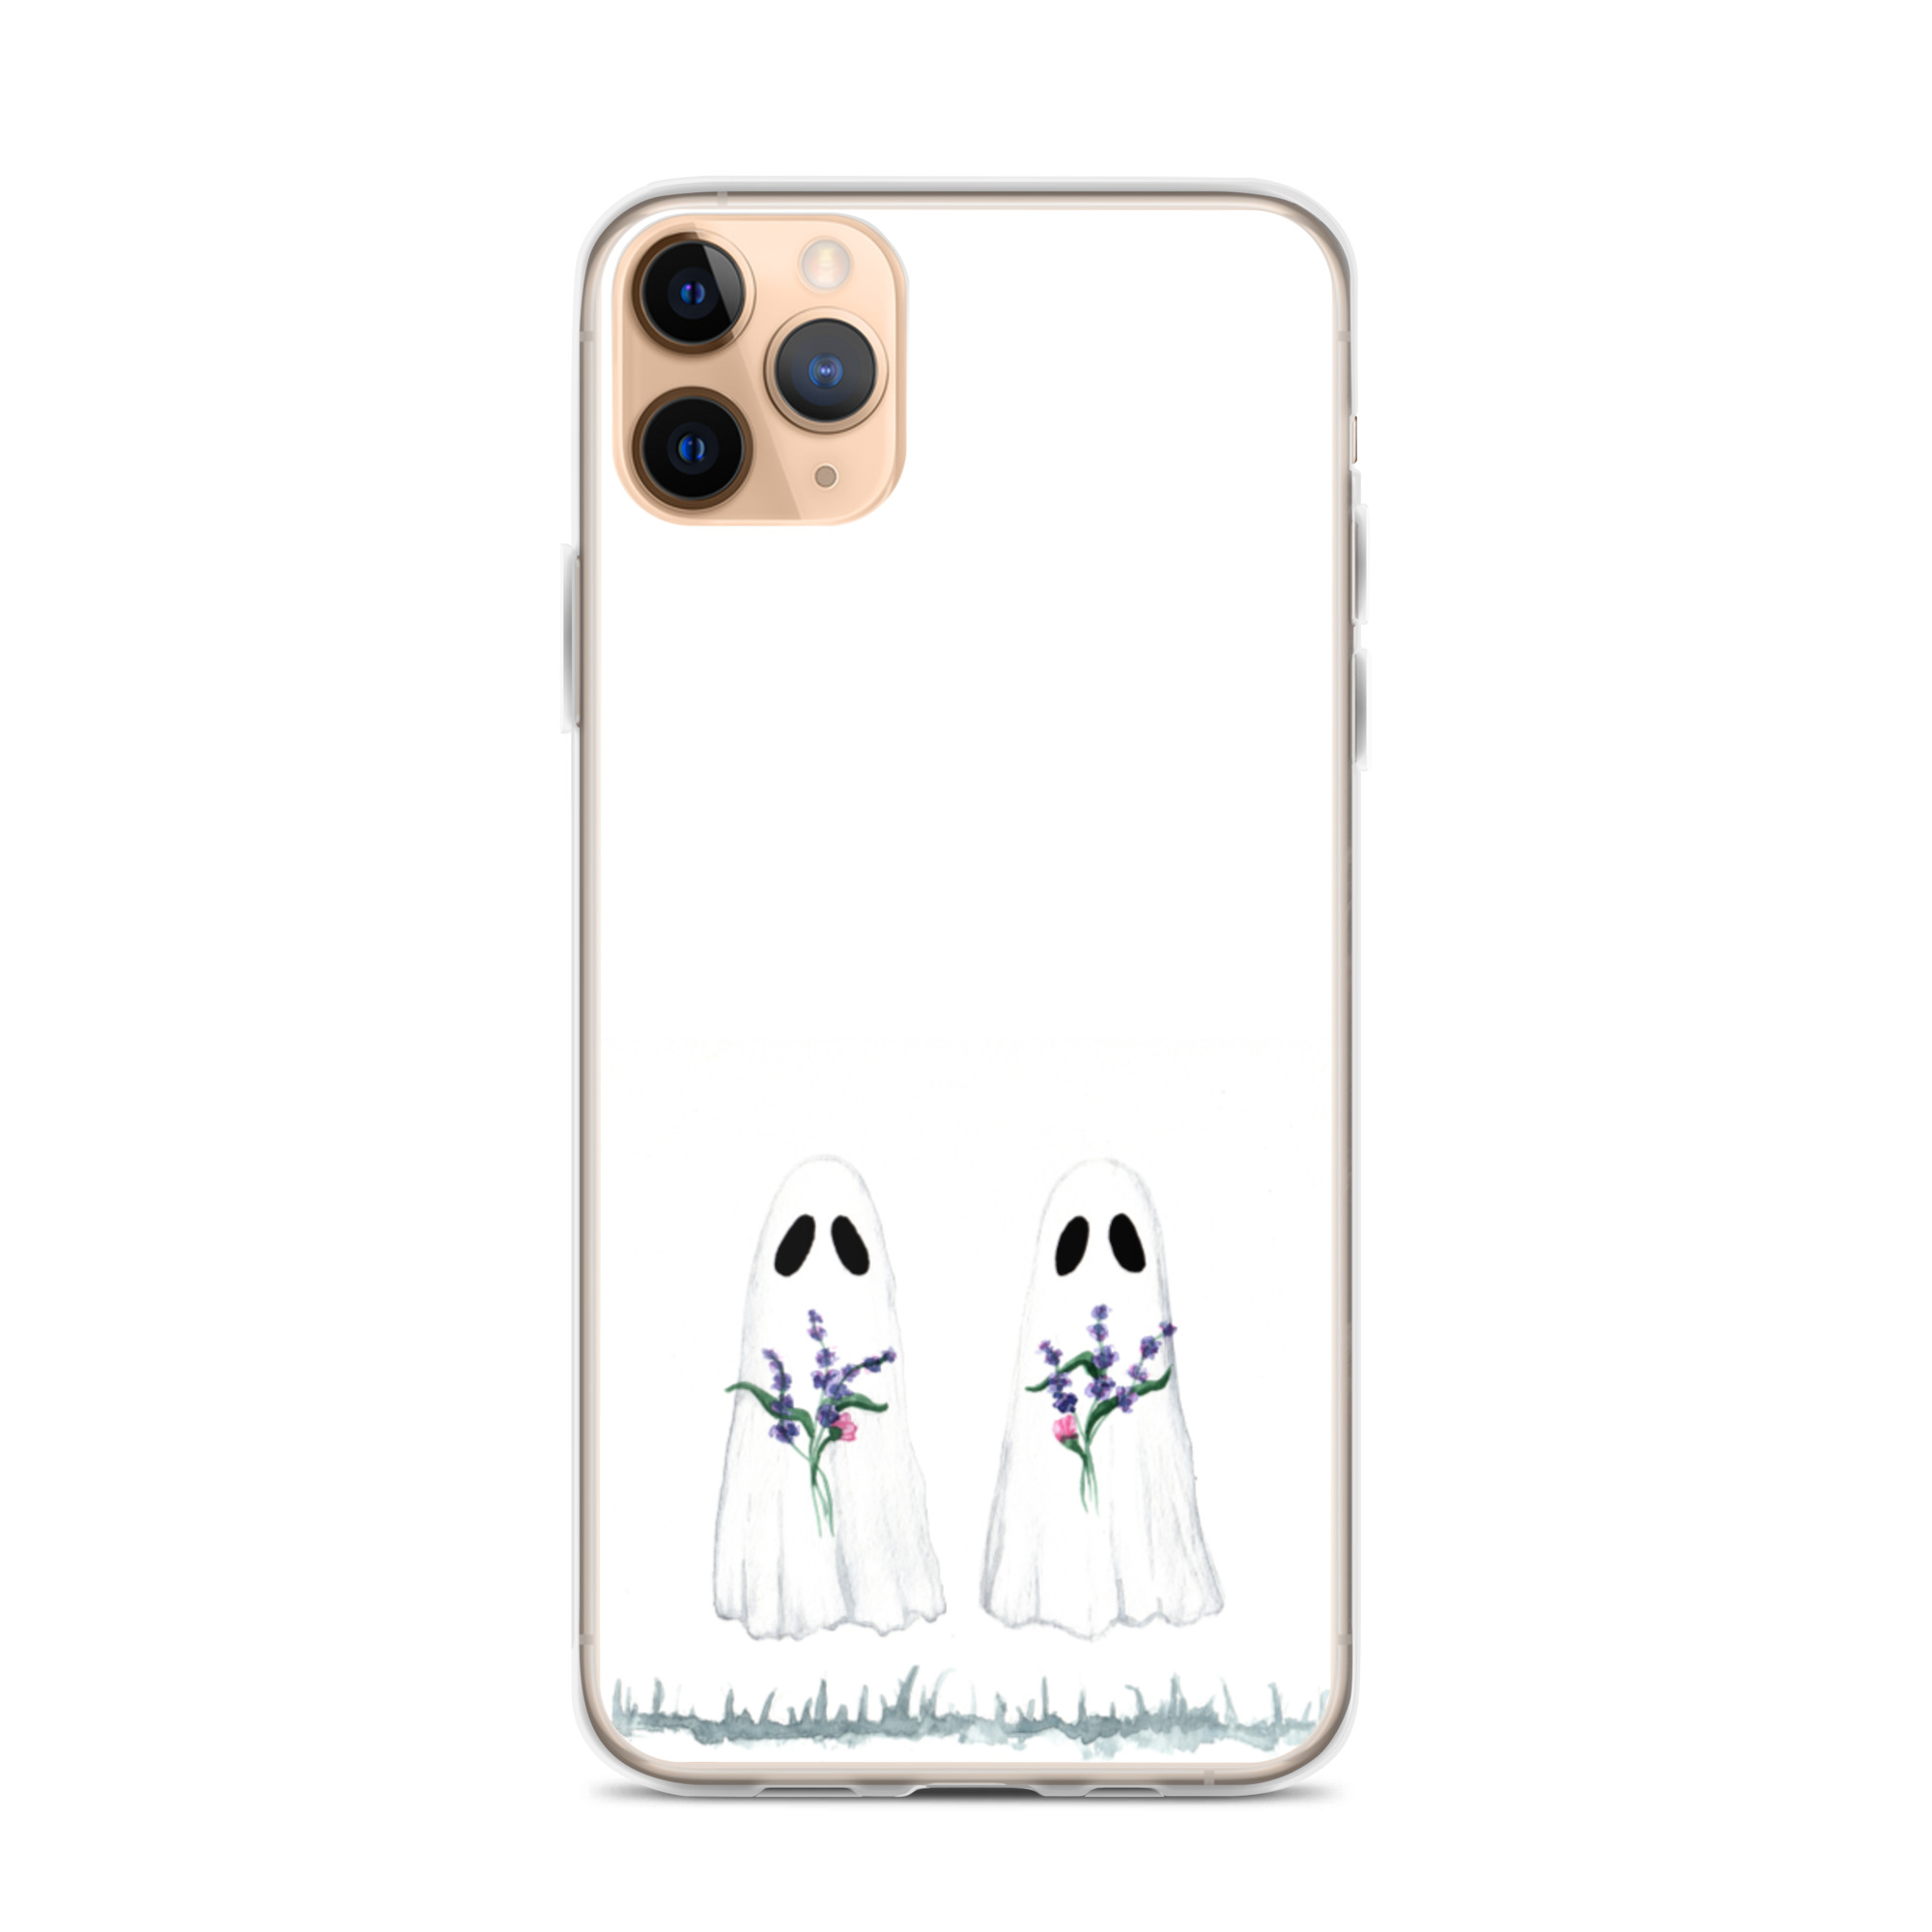 iphone-case-iphone-11-pro-max-case-on-phone-62f15975020be.jpg